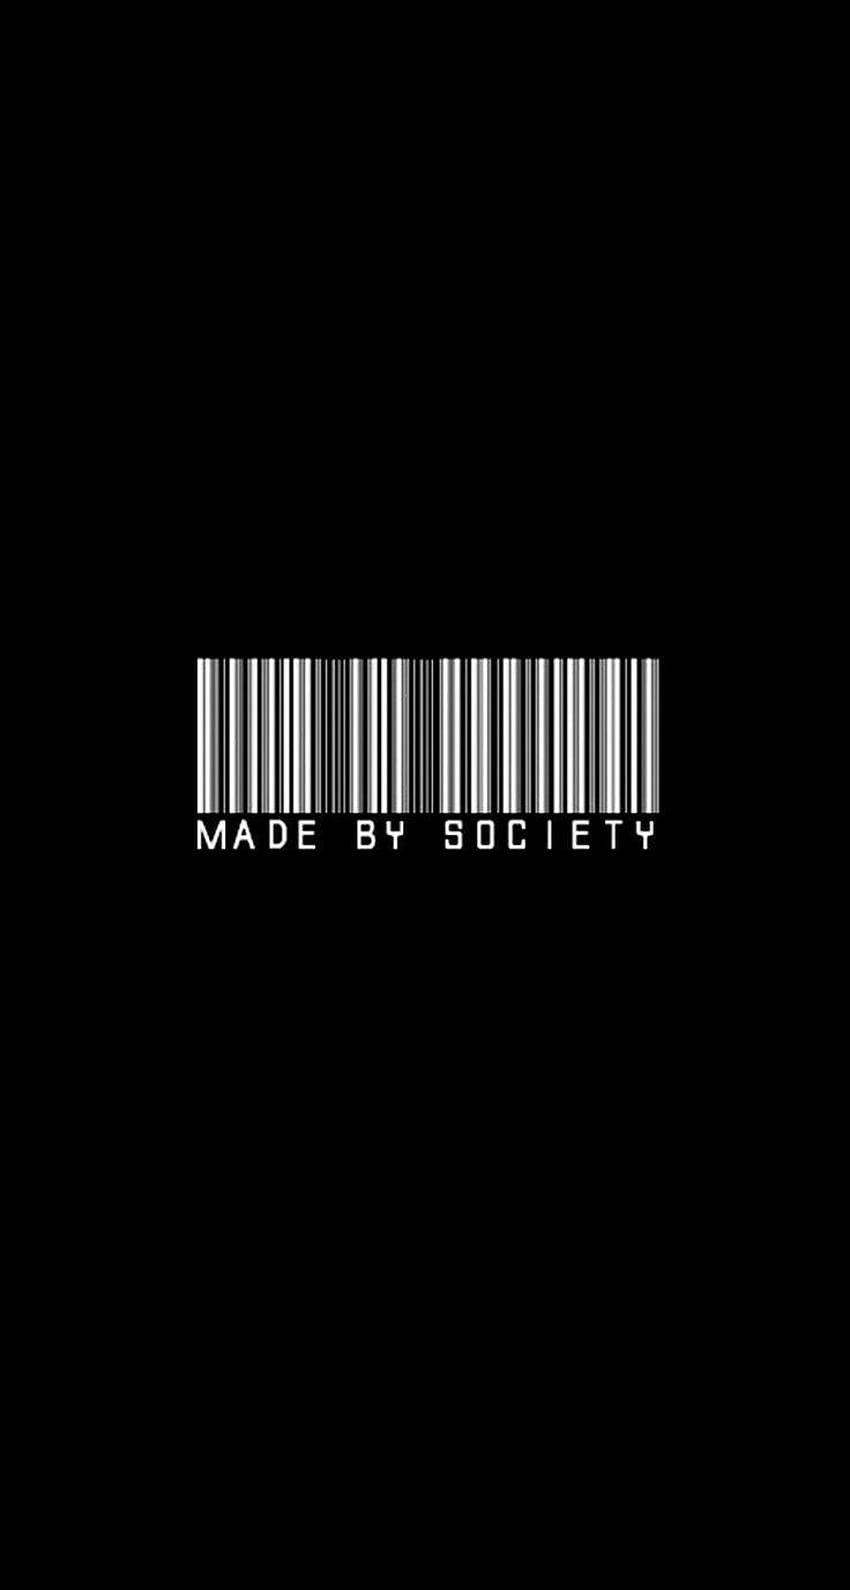 Society made, meaningful for HD phone wallpaper